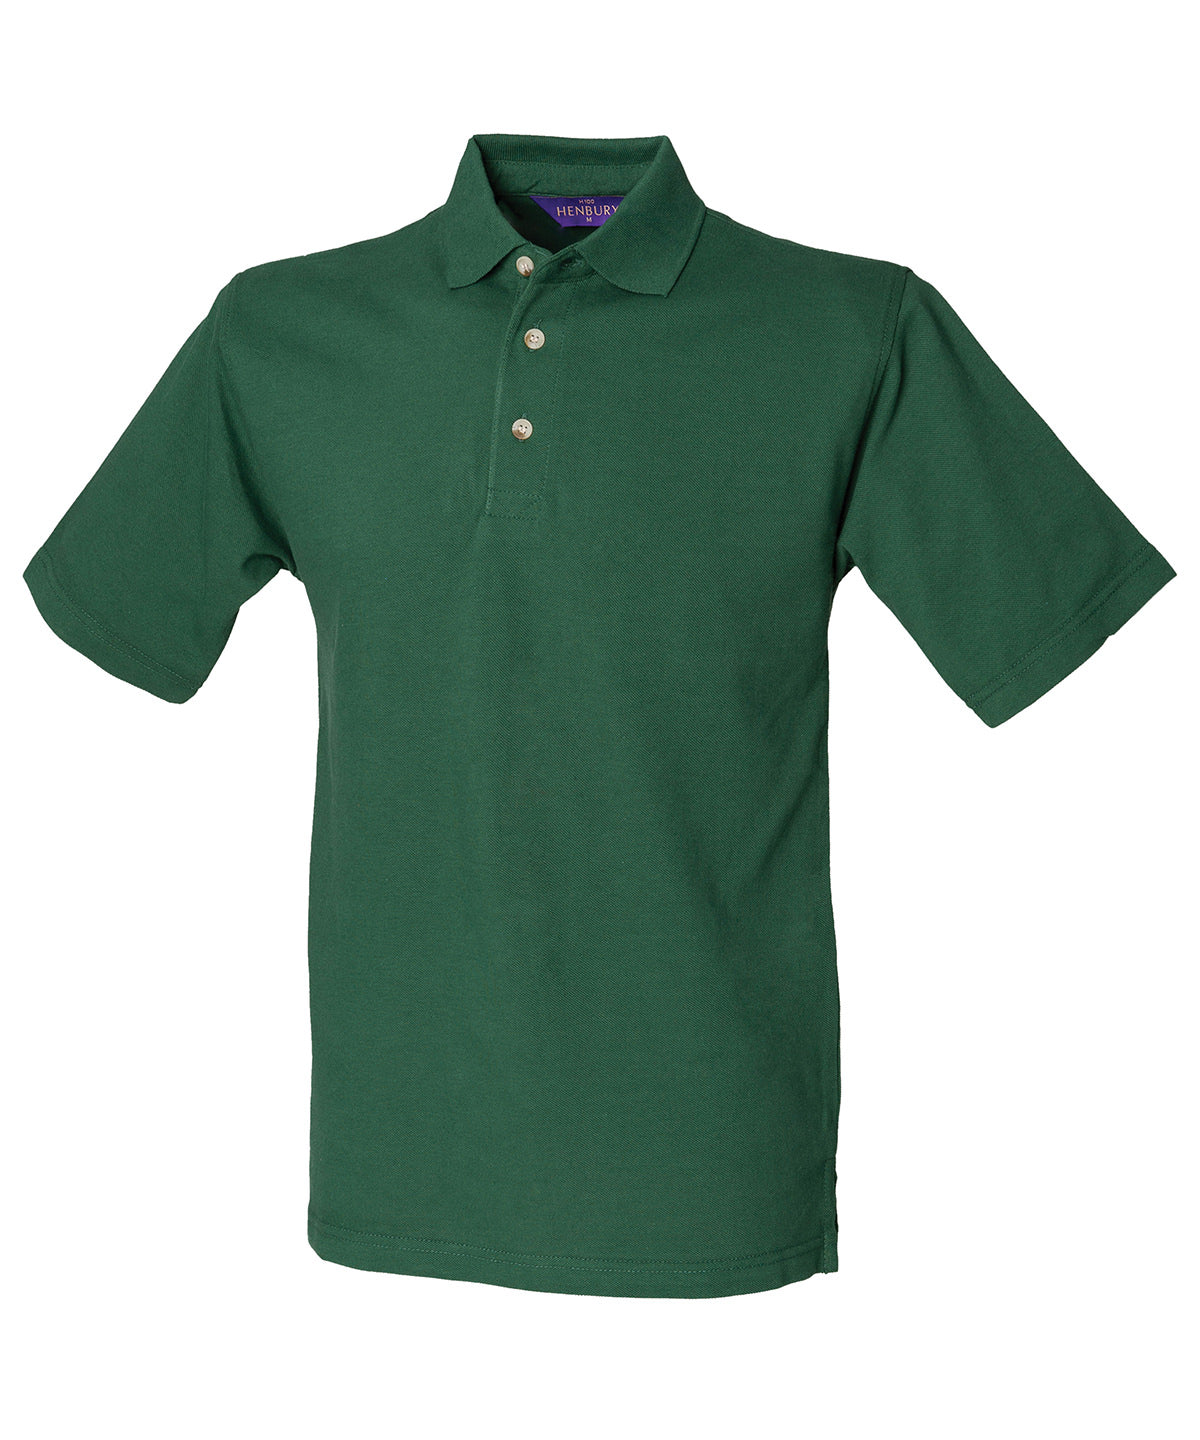 Personalised Polo Shirts - Black Henbury Classic cotton piqué polo with stand-up collar